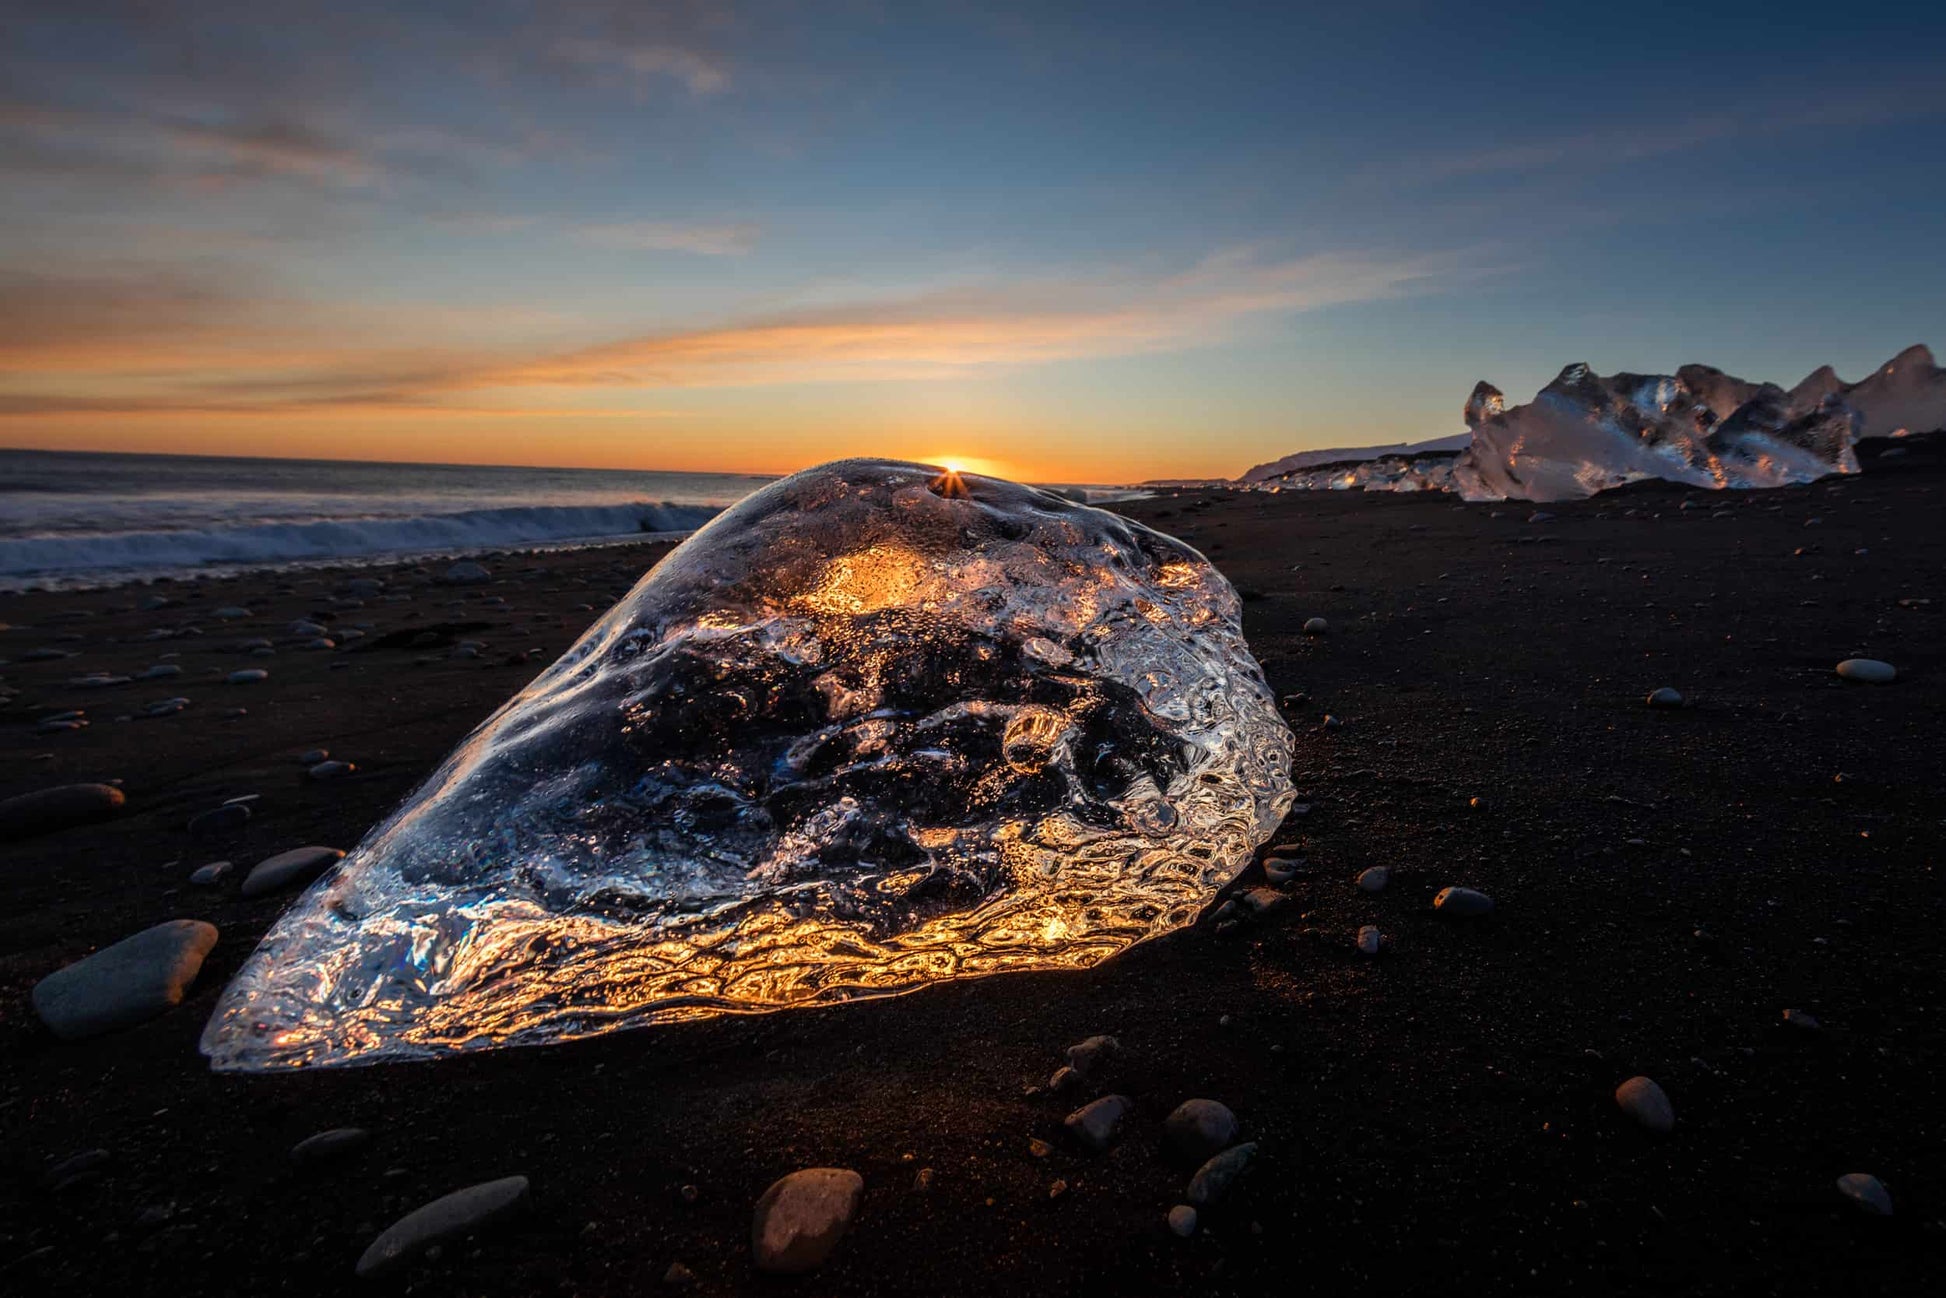 The artpiece 'Ice Diamond' by Markus van Hauten showing an ice rock in the shape of a diamond on a beach at dawn, scattering the light through the ice.